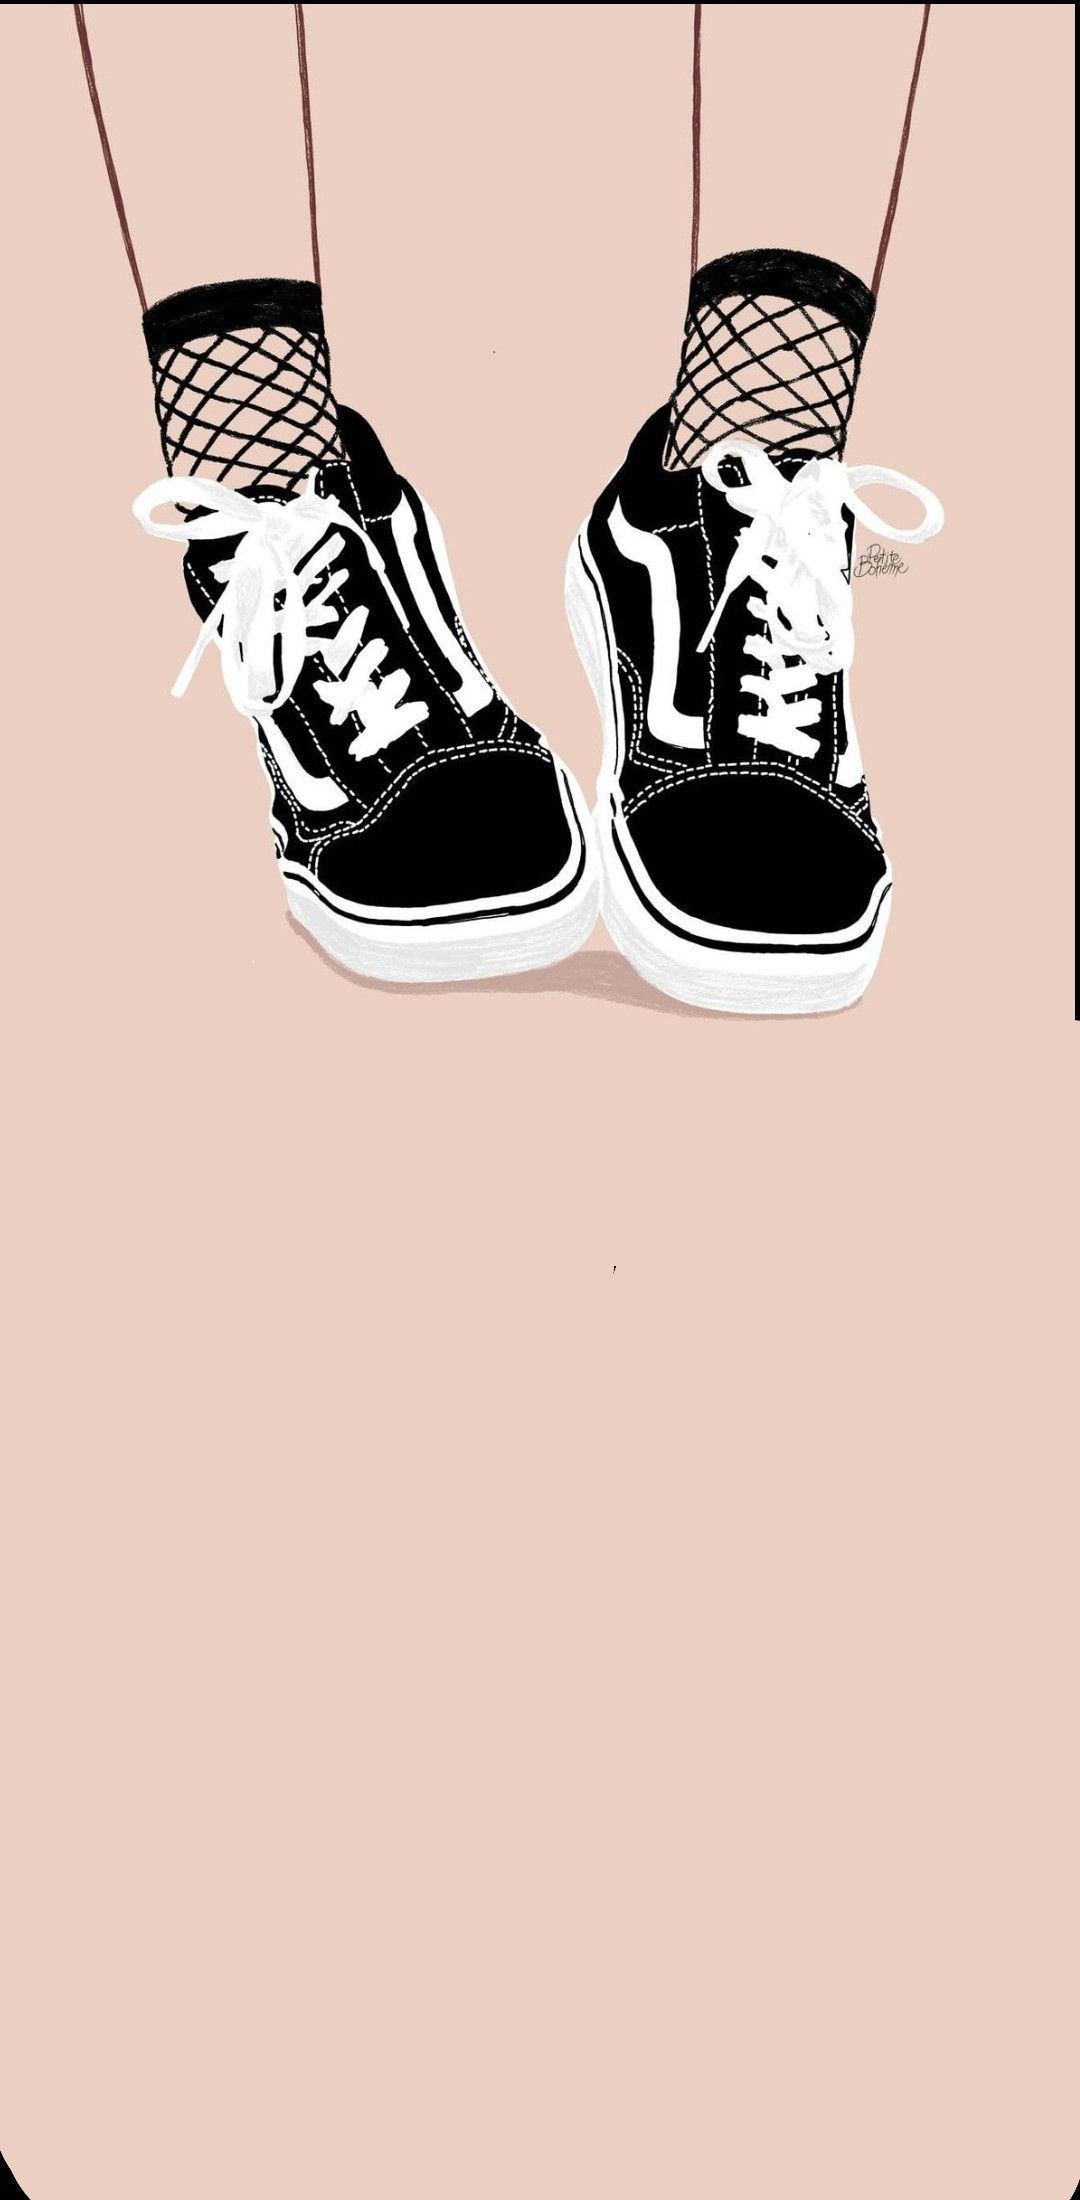 Aesthetic phone background of a pair of feet wearing black and white vans sneakers and fishnet socks - Shoes